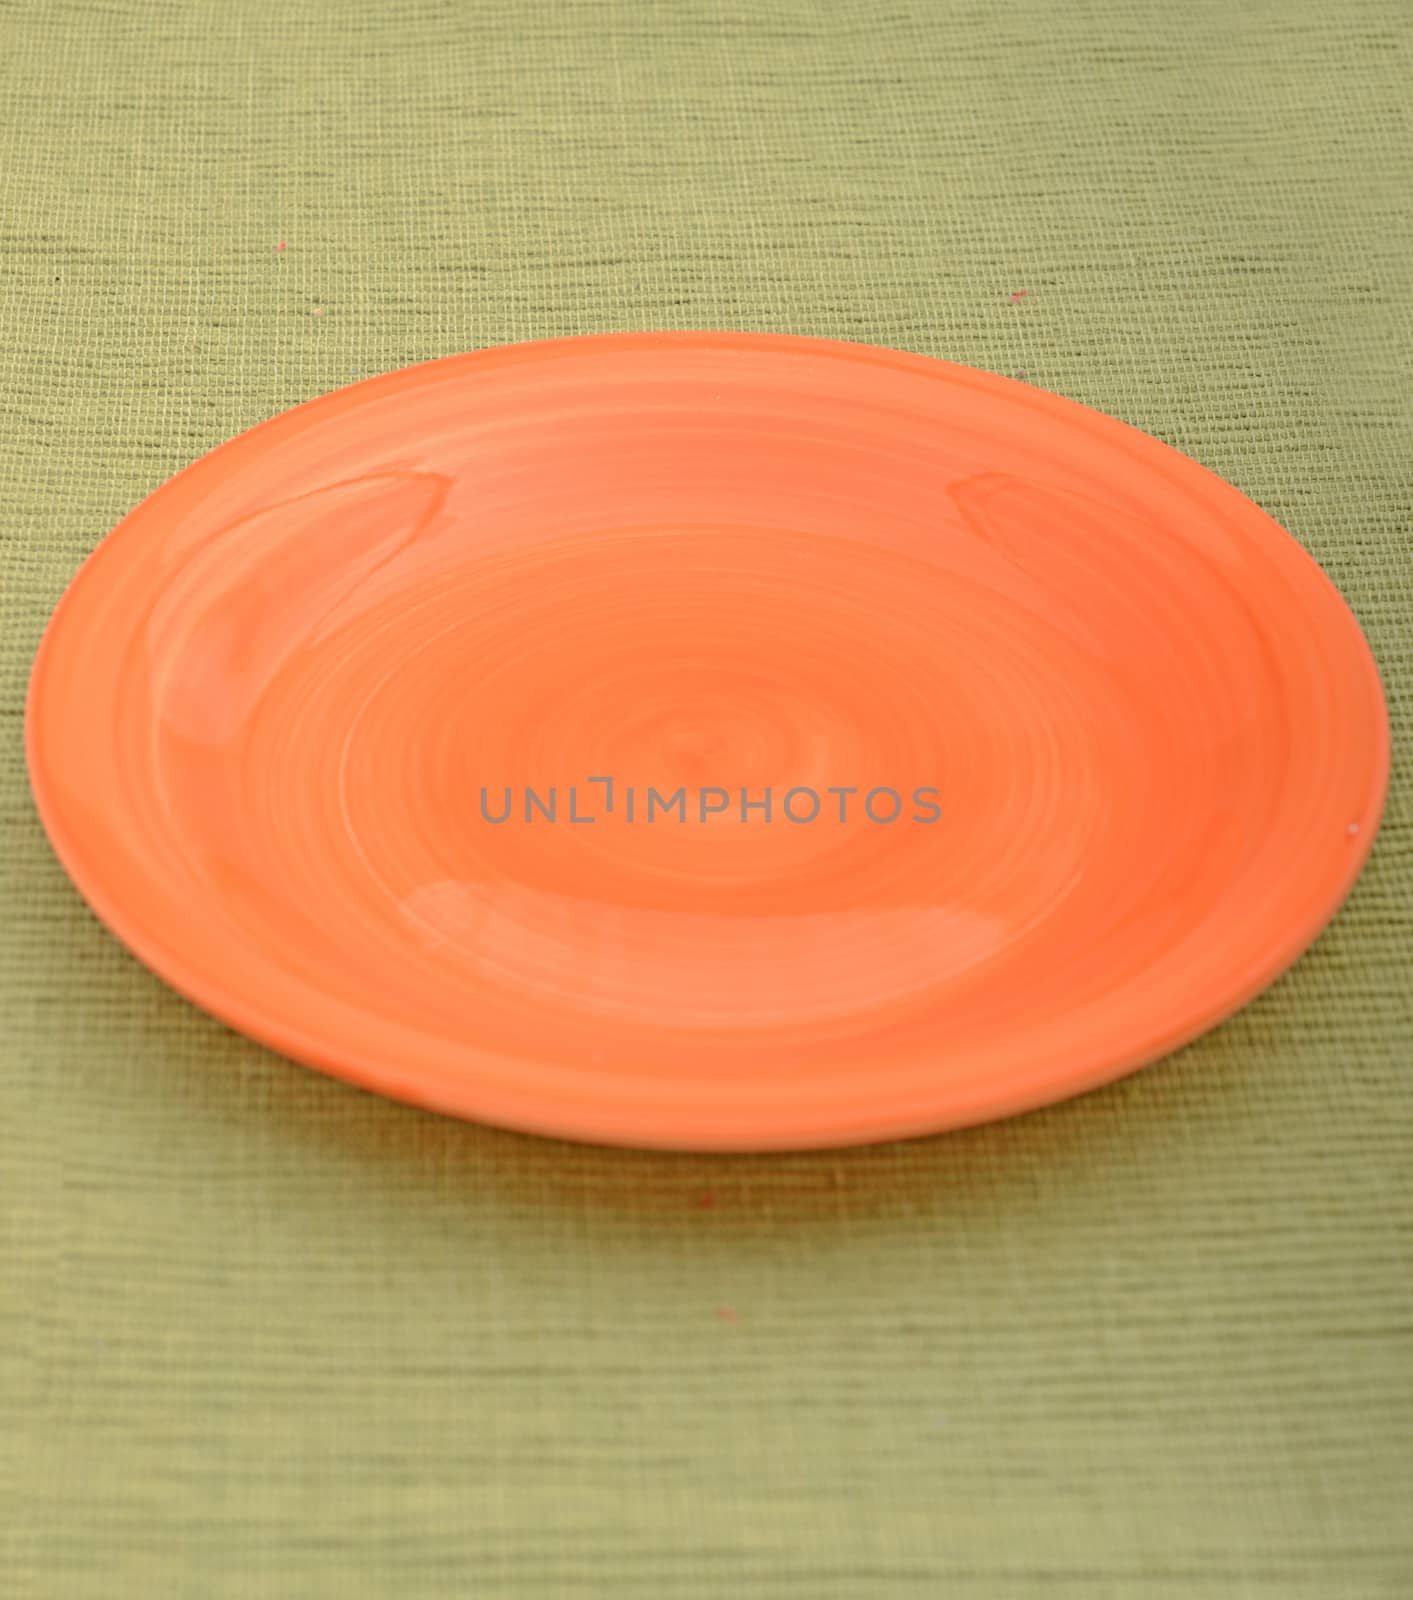 empty orange plate on a green textured background